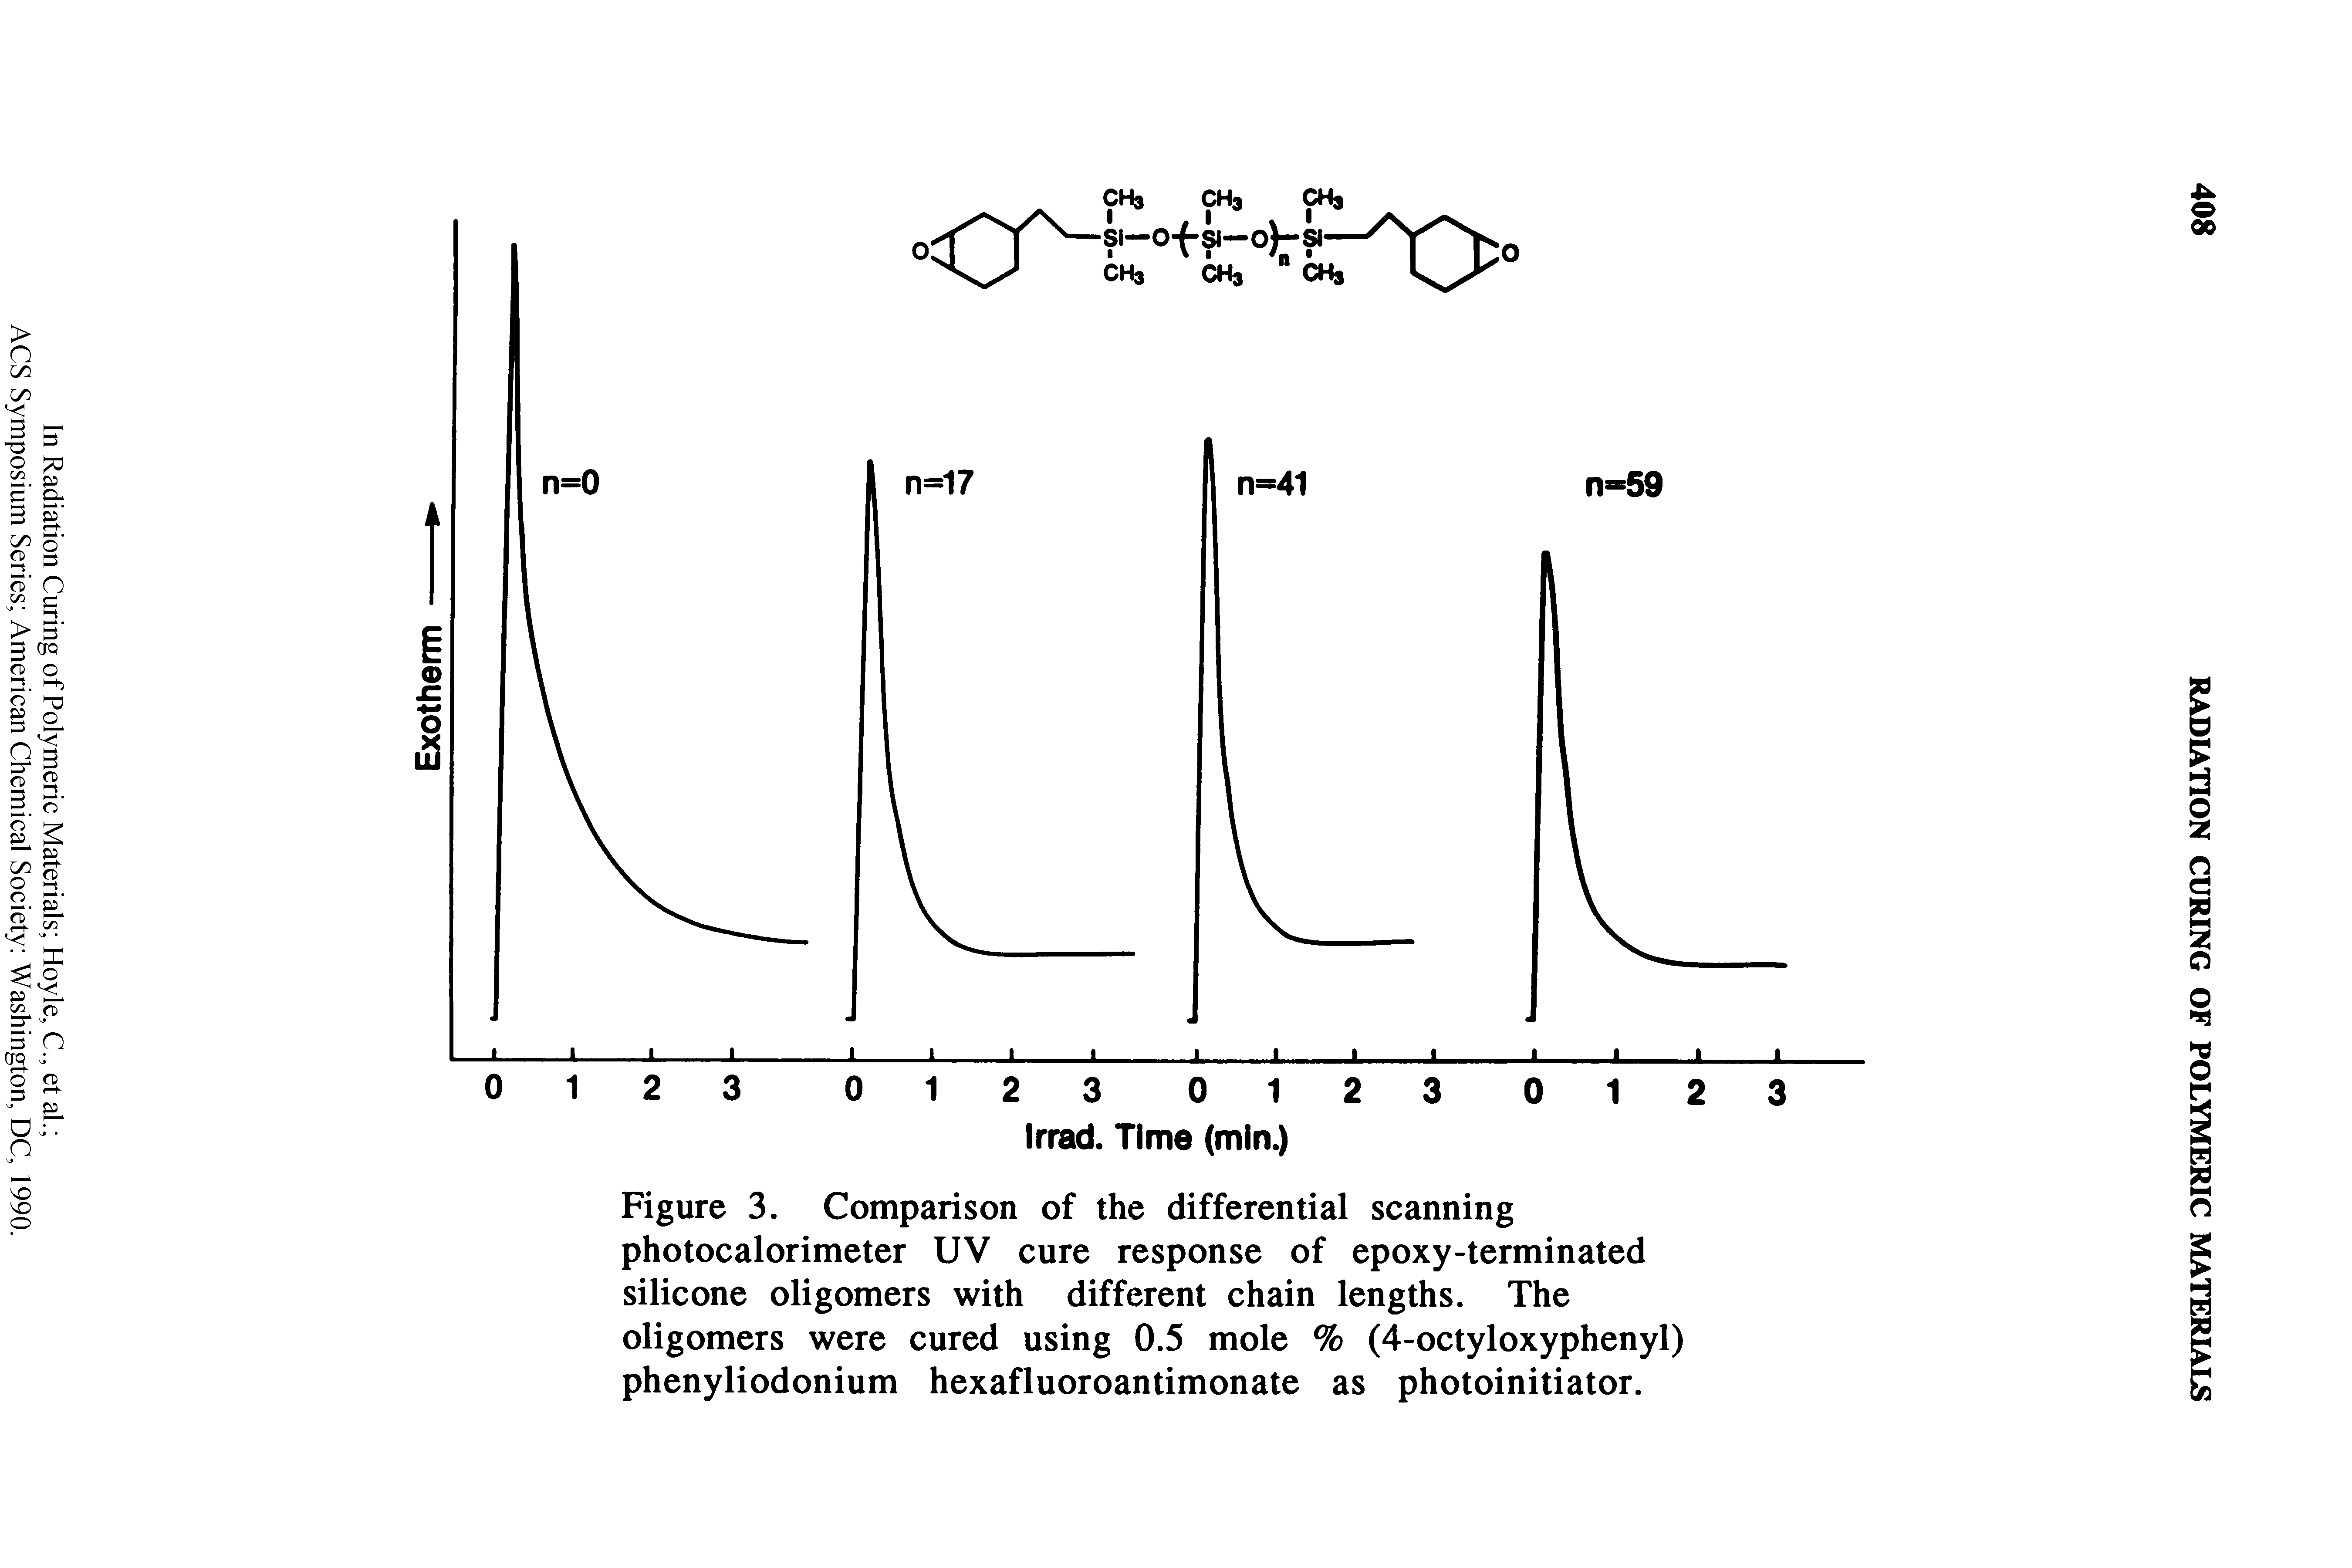 Figure 3. Comparison of the differential scanning photocalorimeter UV cure response of epoxy-terminated silicone oligomers with different chain lengths. The oligomers were cured using 0.5 mole % (4-octyloxyphenyl) phenyliodonium hexafluoroantimonate as photoinitiator.